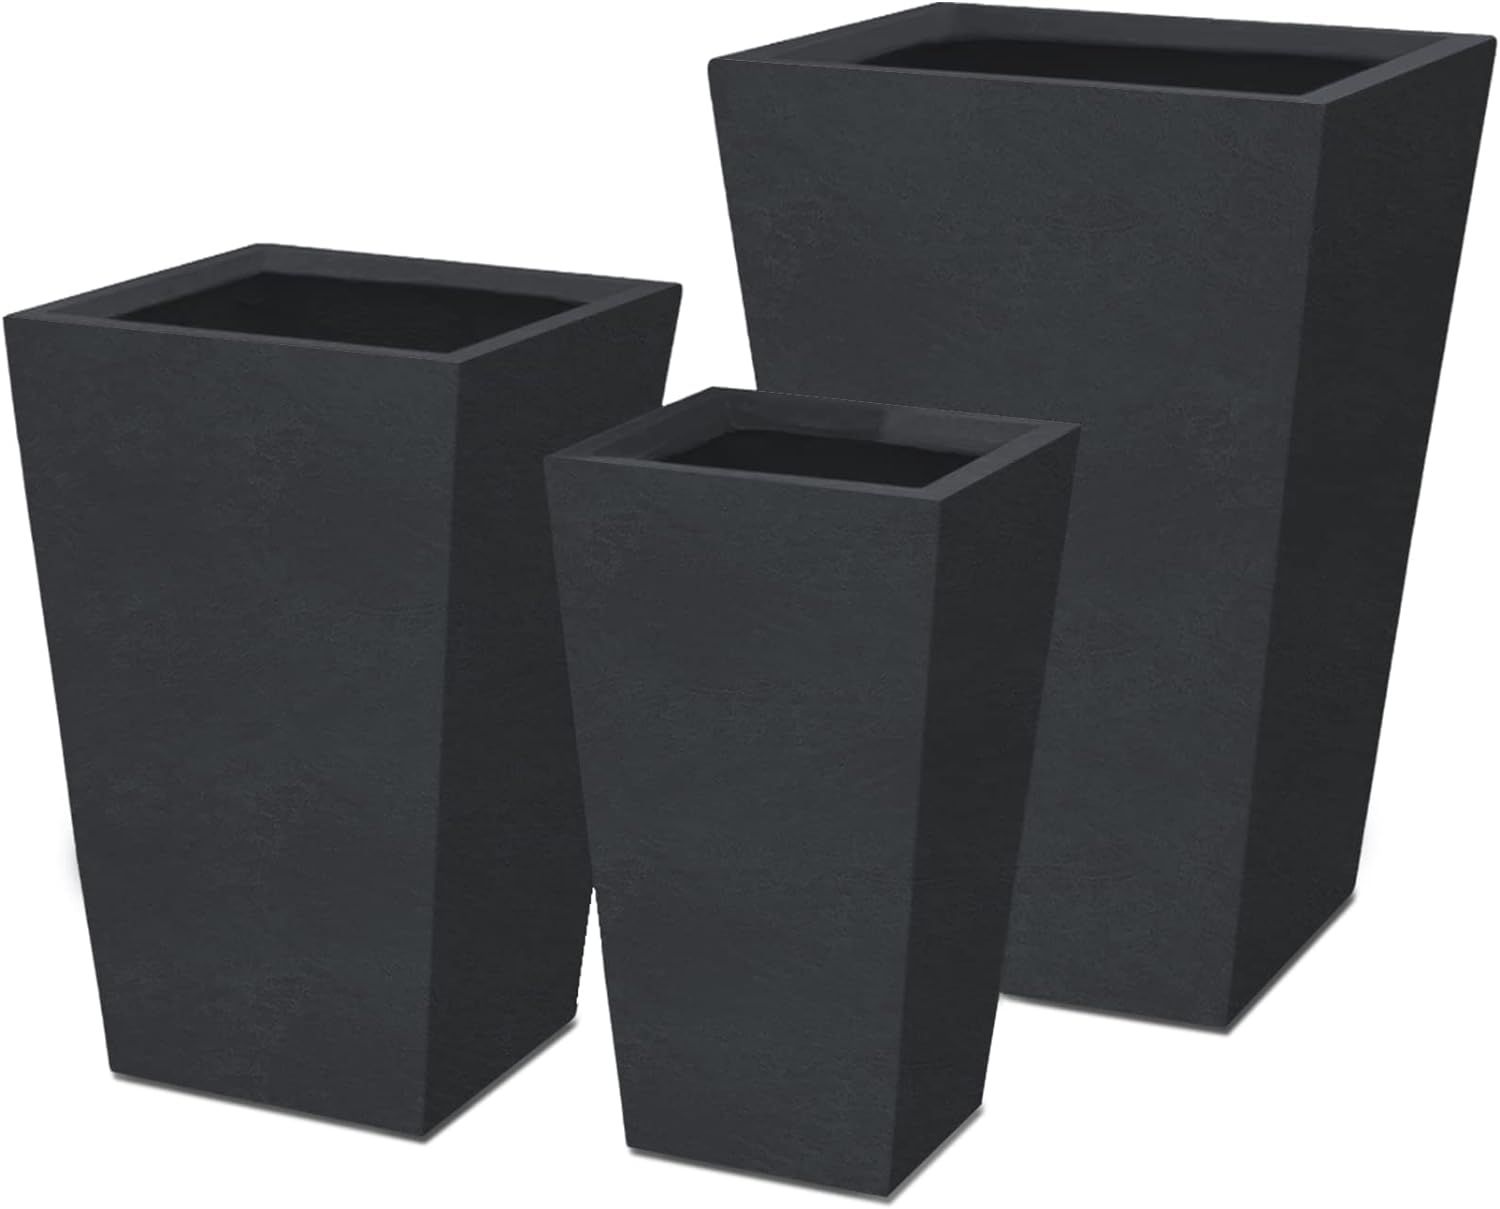 Kante 24.4",18.5",15.7" H Tall Tapered Concrete Planters (Set of 3), Large Outdoor Indoor Garden ... | Amazon (US)